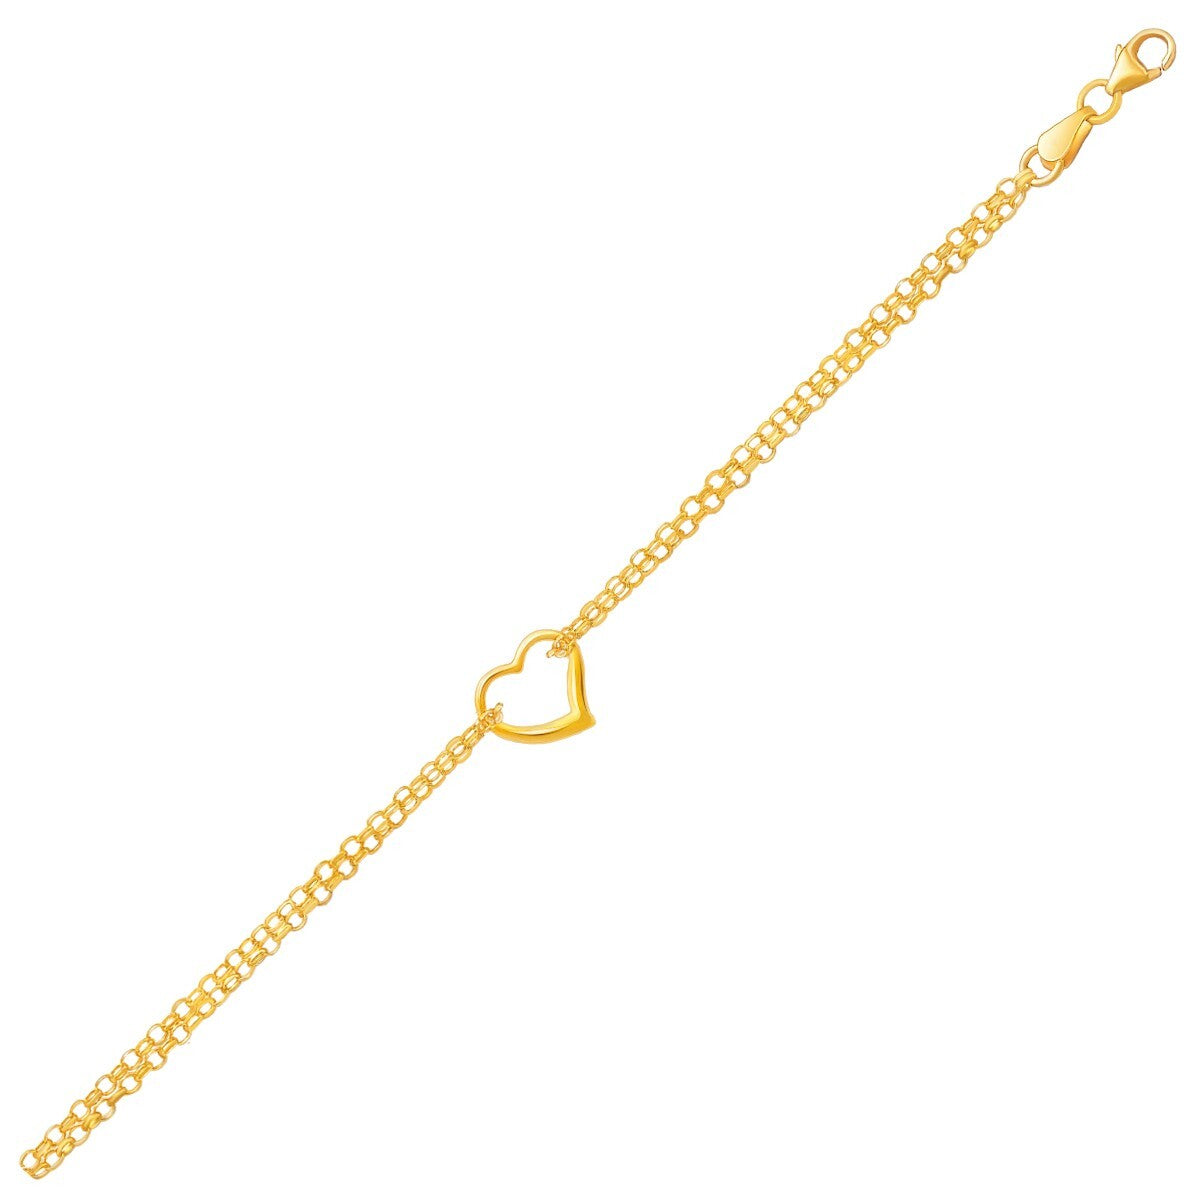 14k Yellow Gold Double Rolo Chain Anklet with an Open Heart Station, size 10''